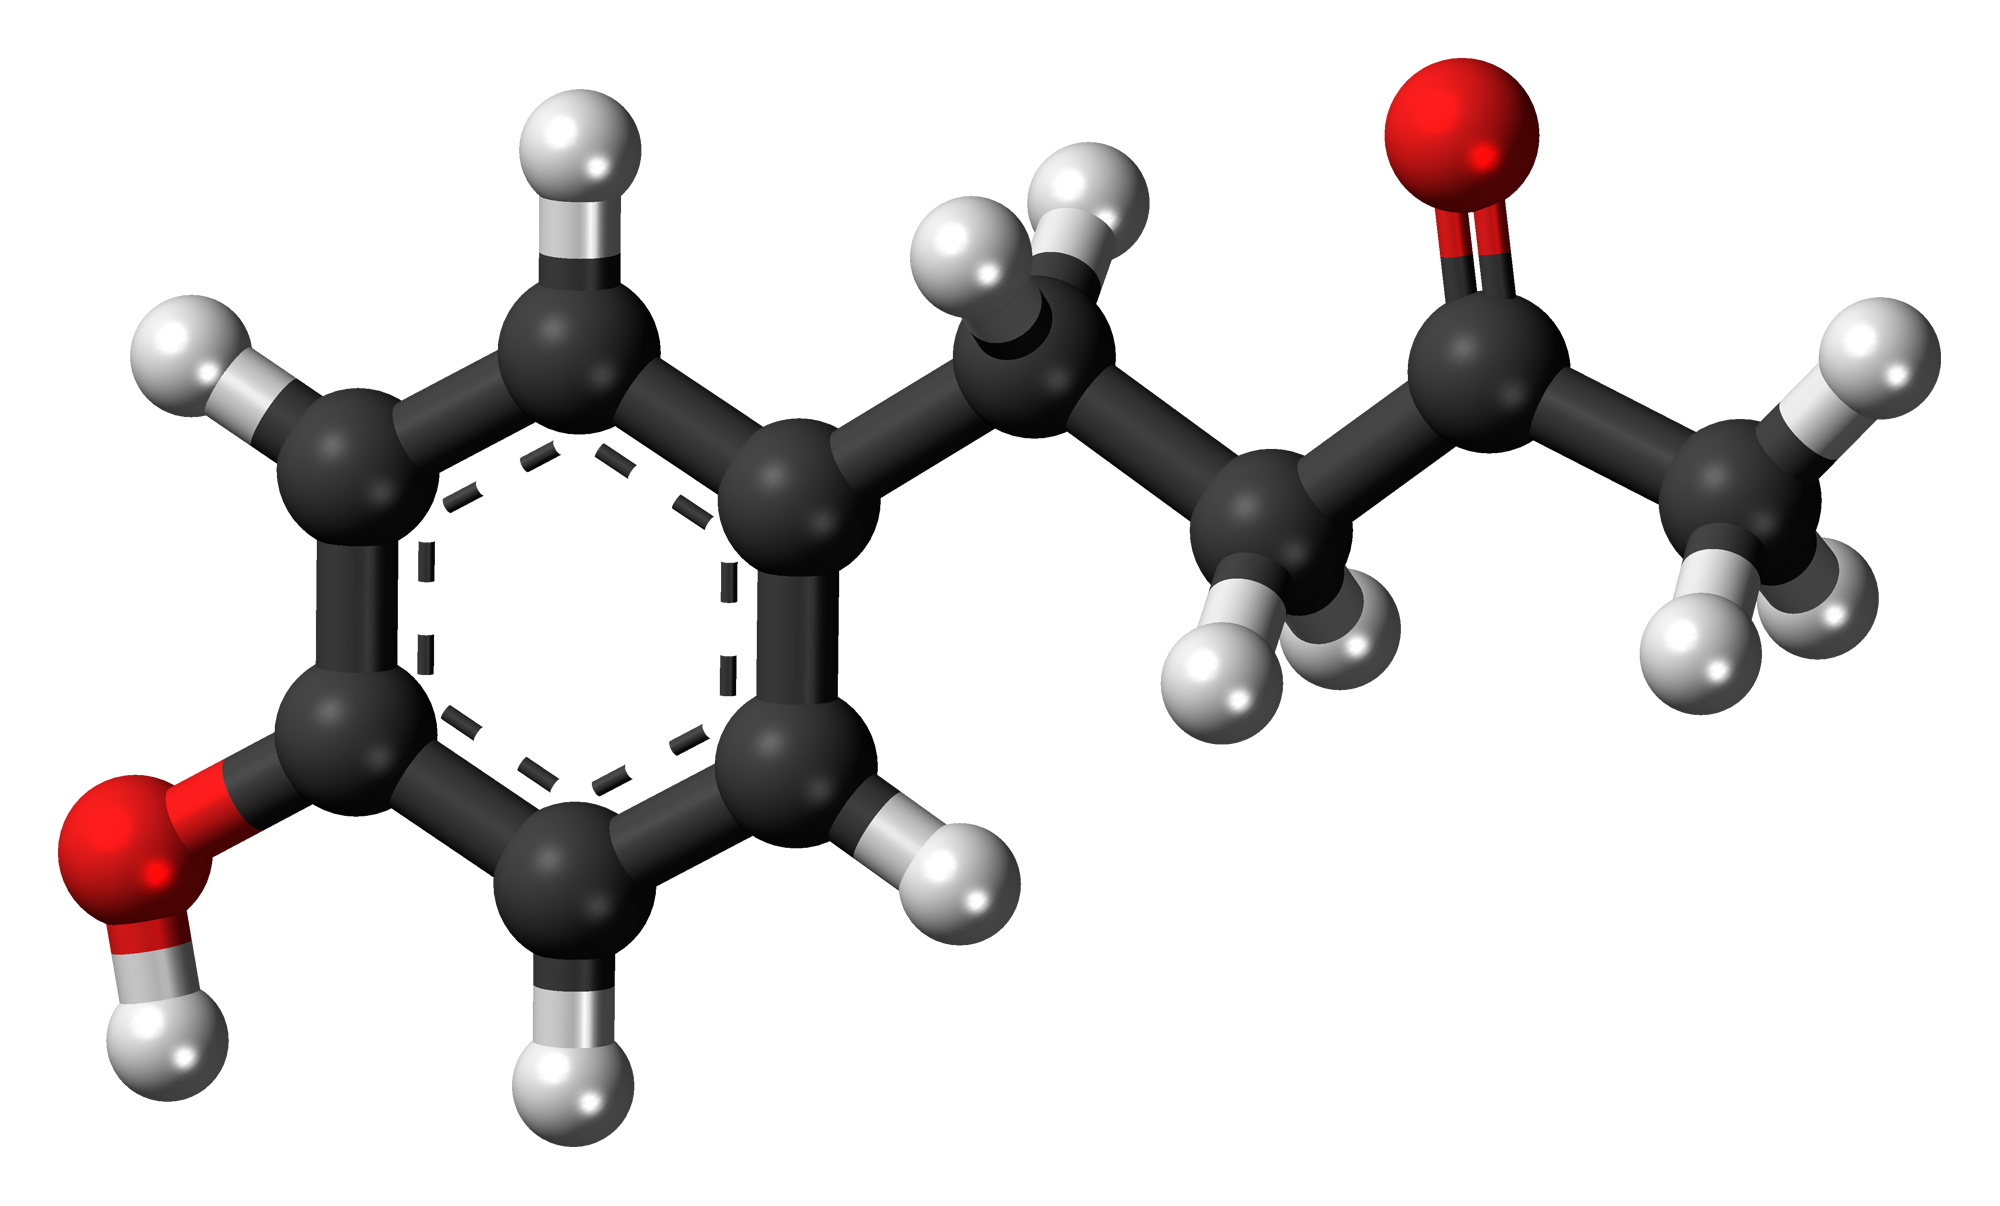 This is the molecular formula for Raspberry Ketone